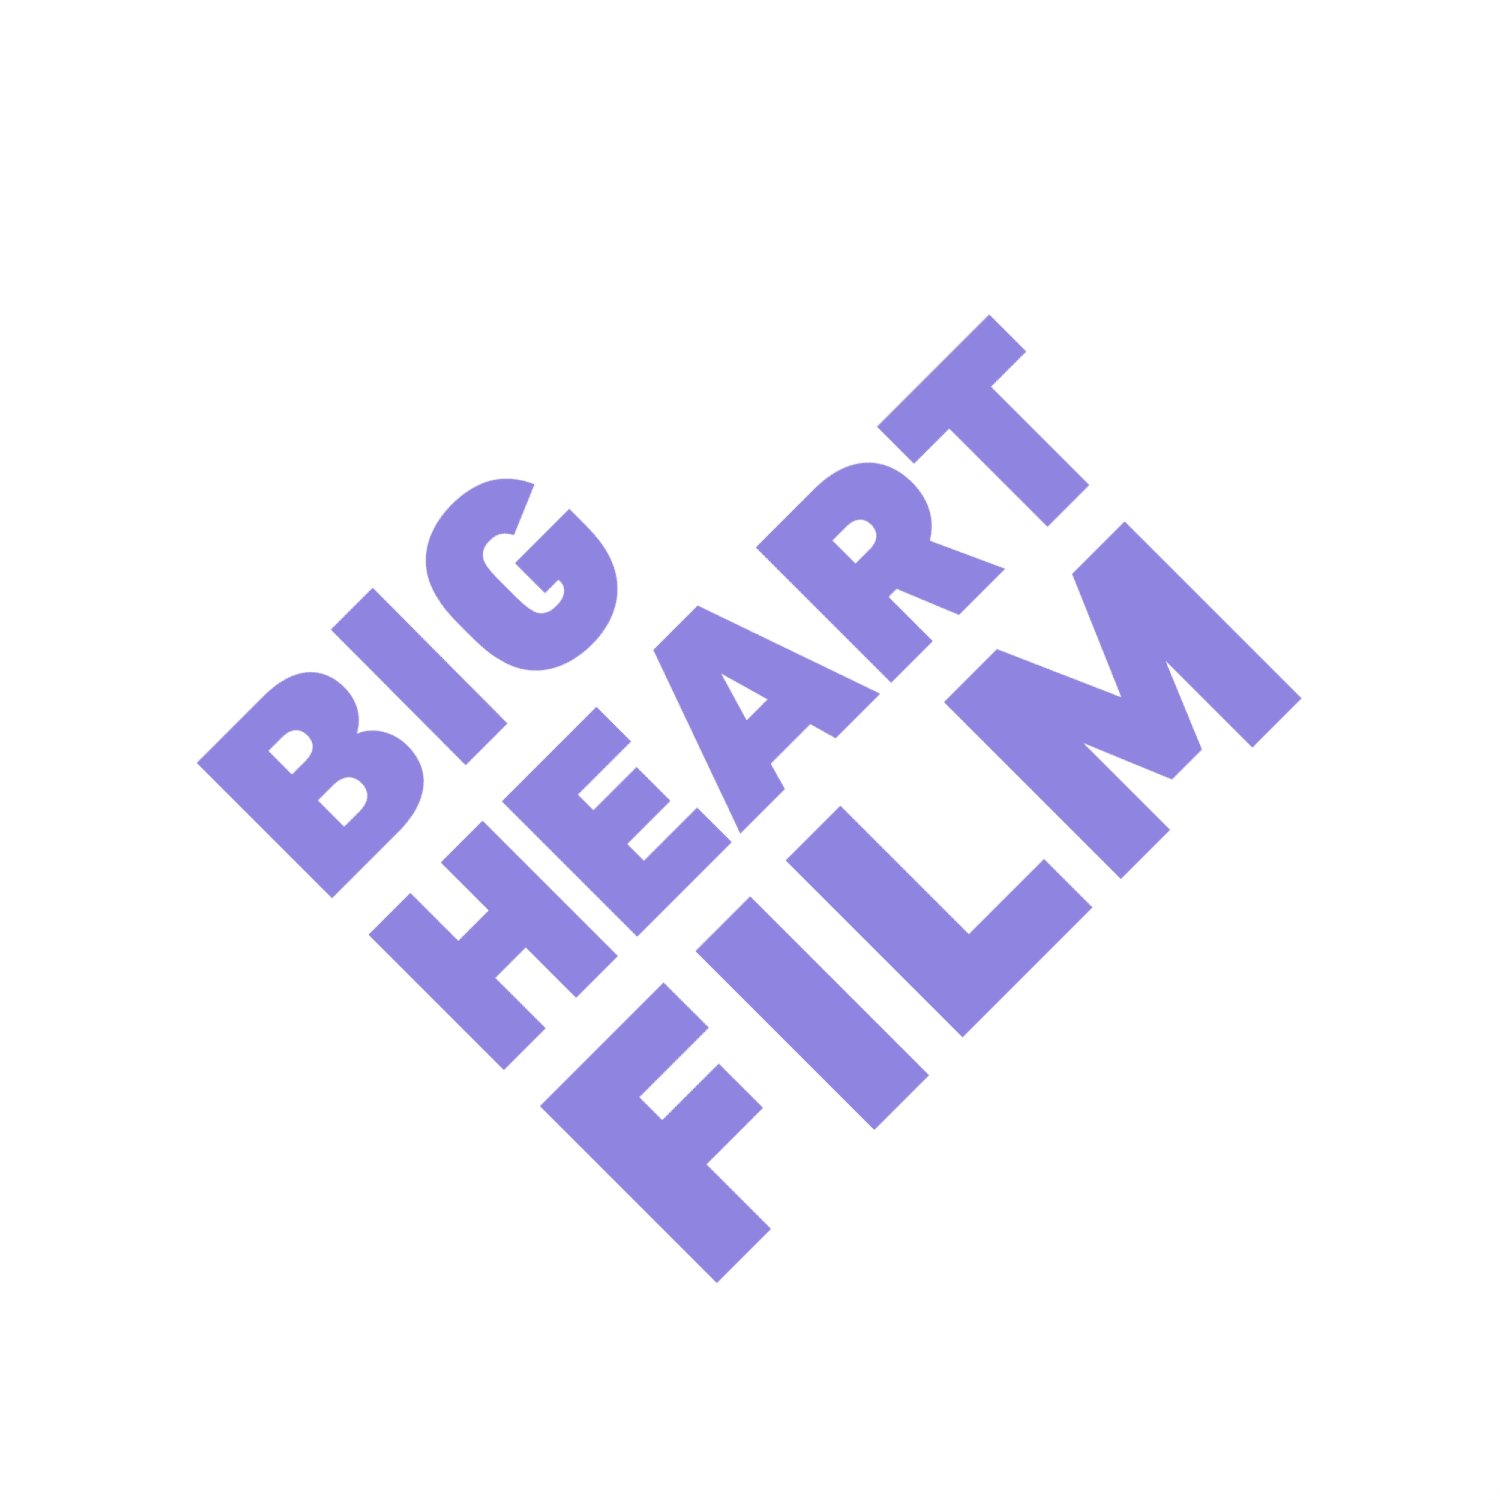 animated logo in the shape of a heart reading 'big heart film'